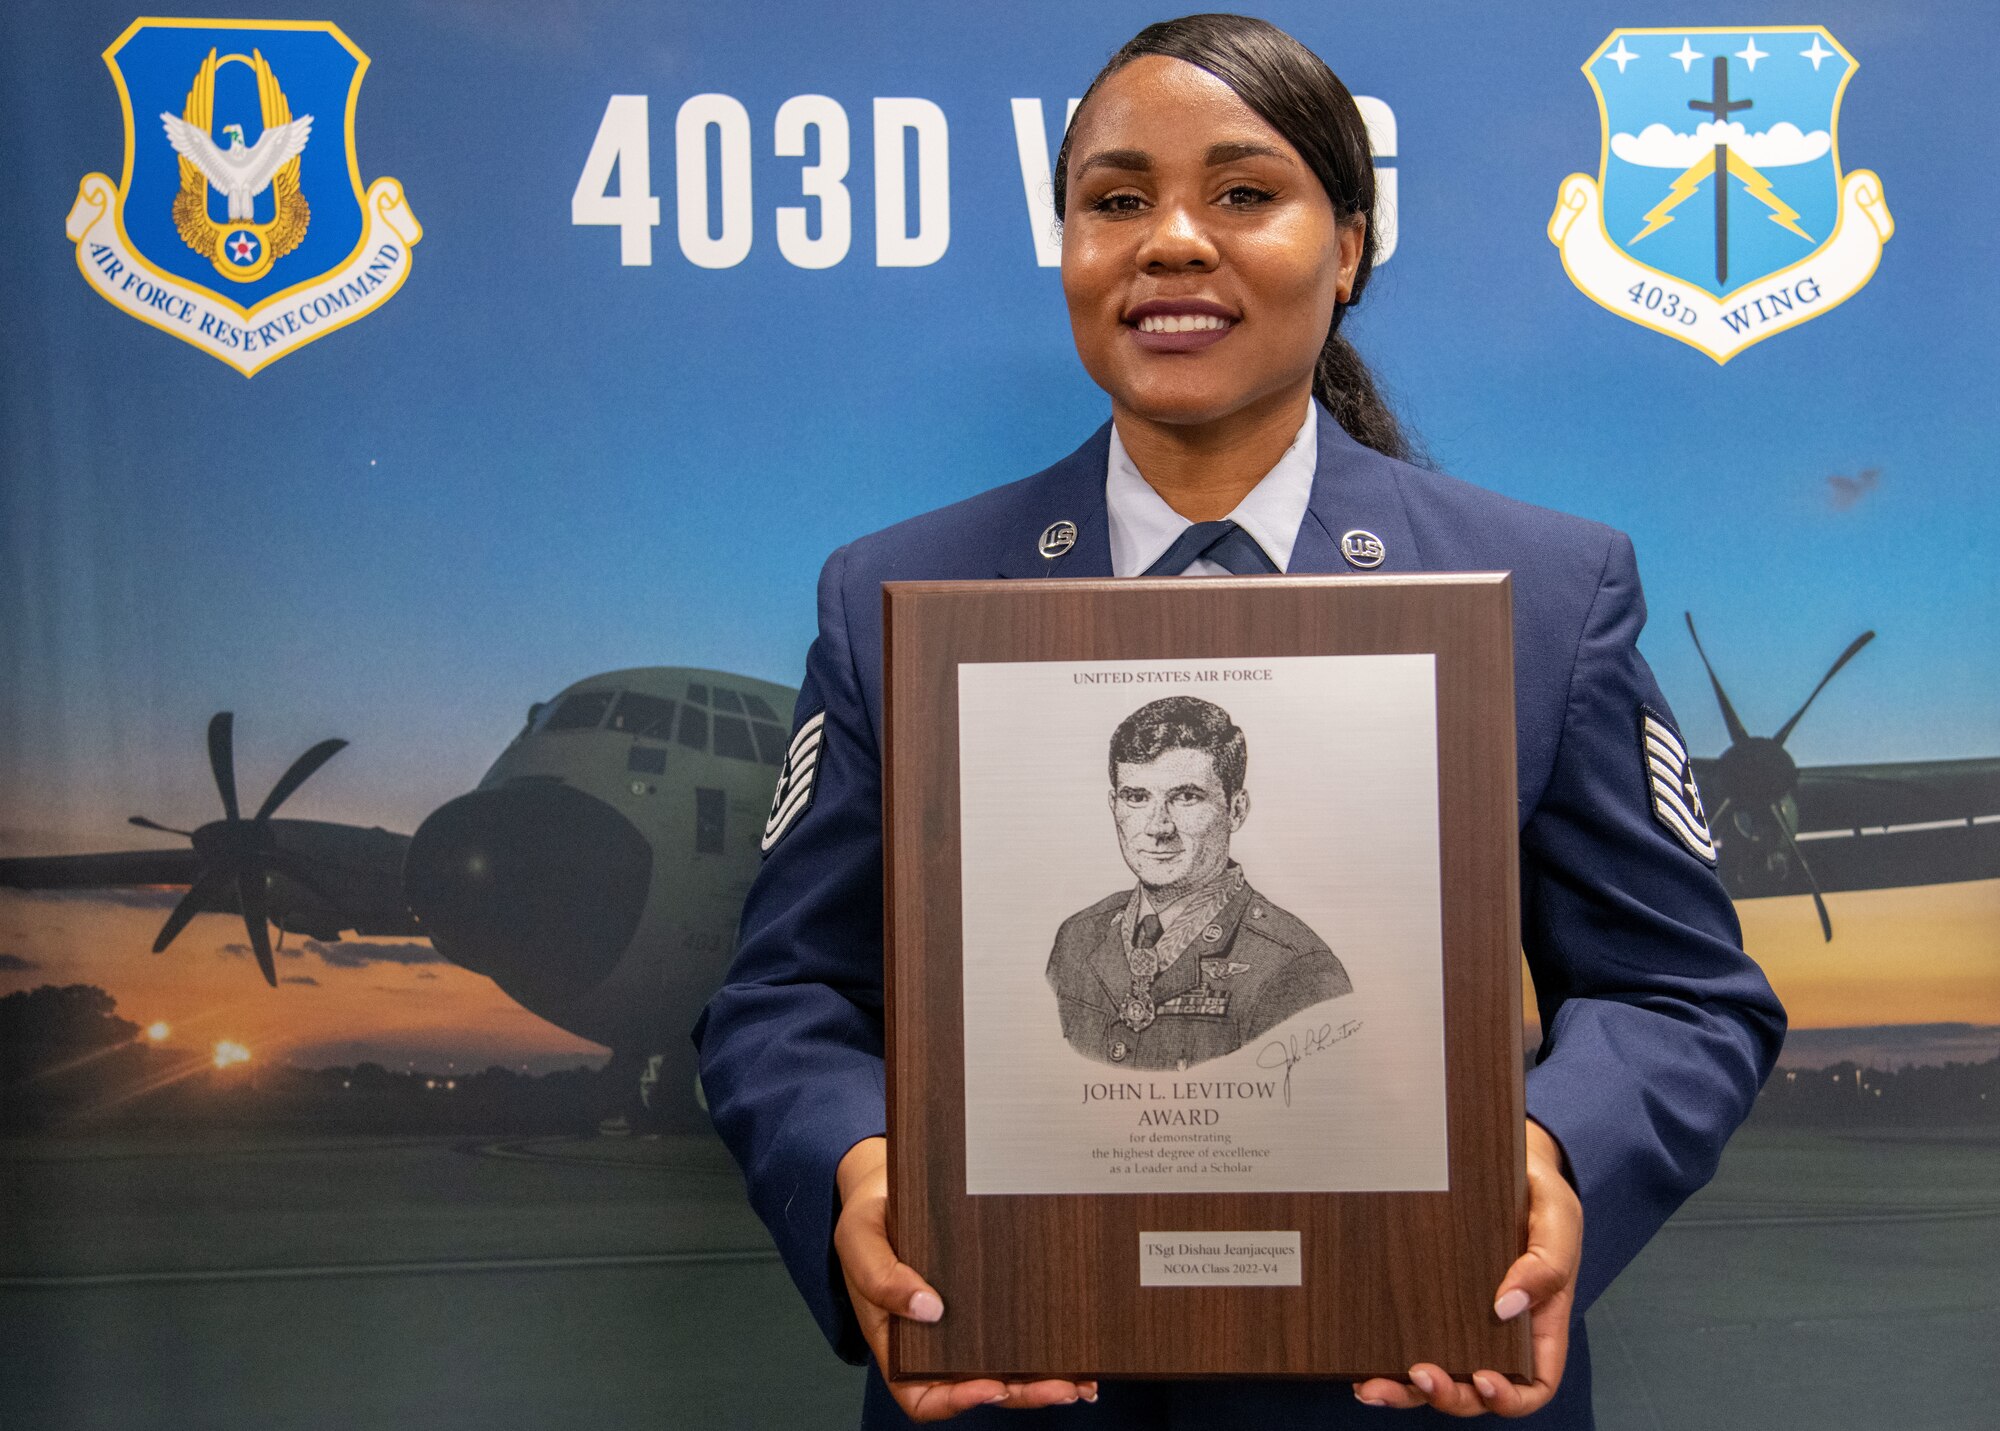 TSgt. JeanJacques stands in front of a 403d Wing display holding a plaque